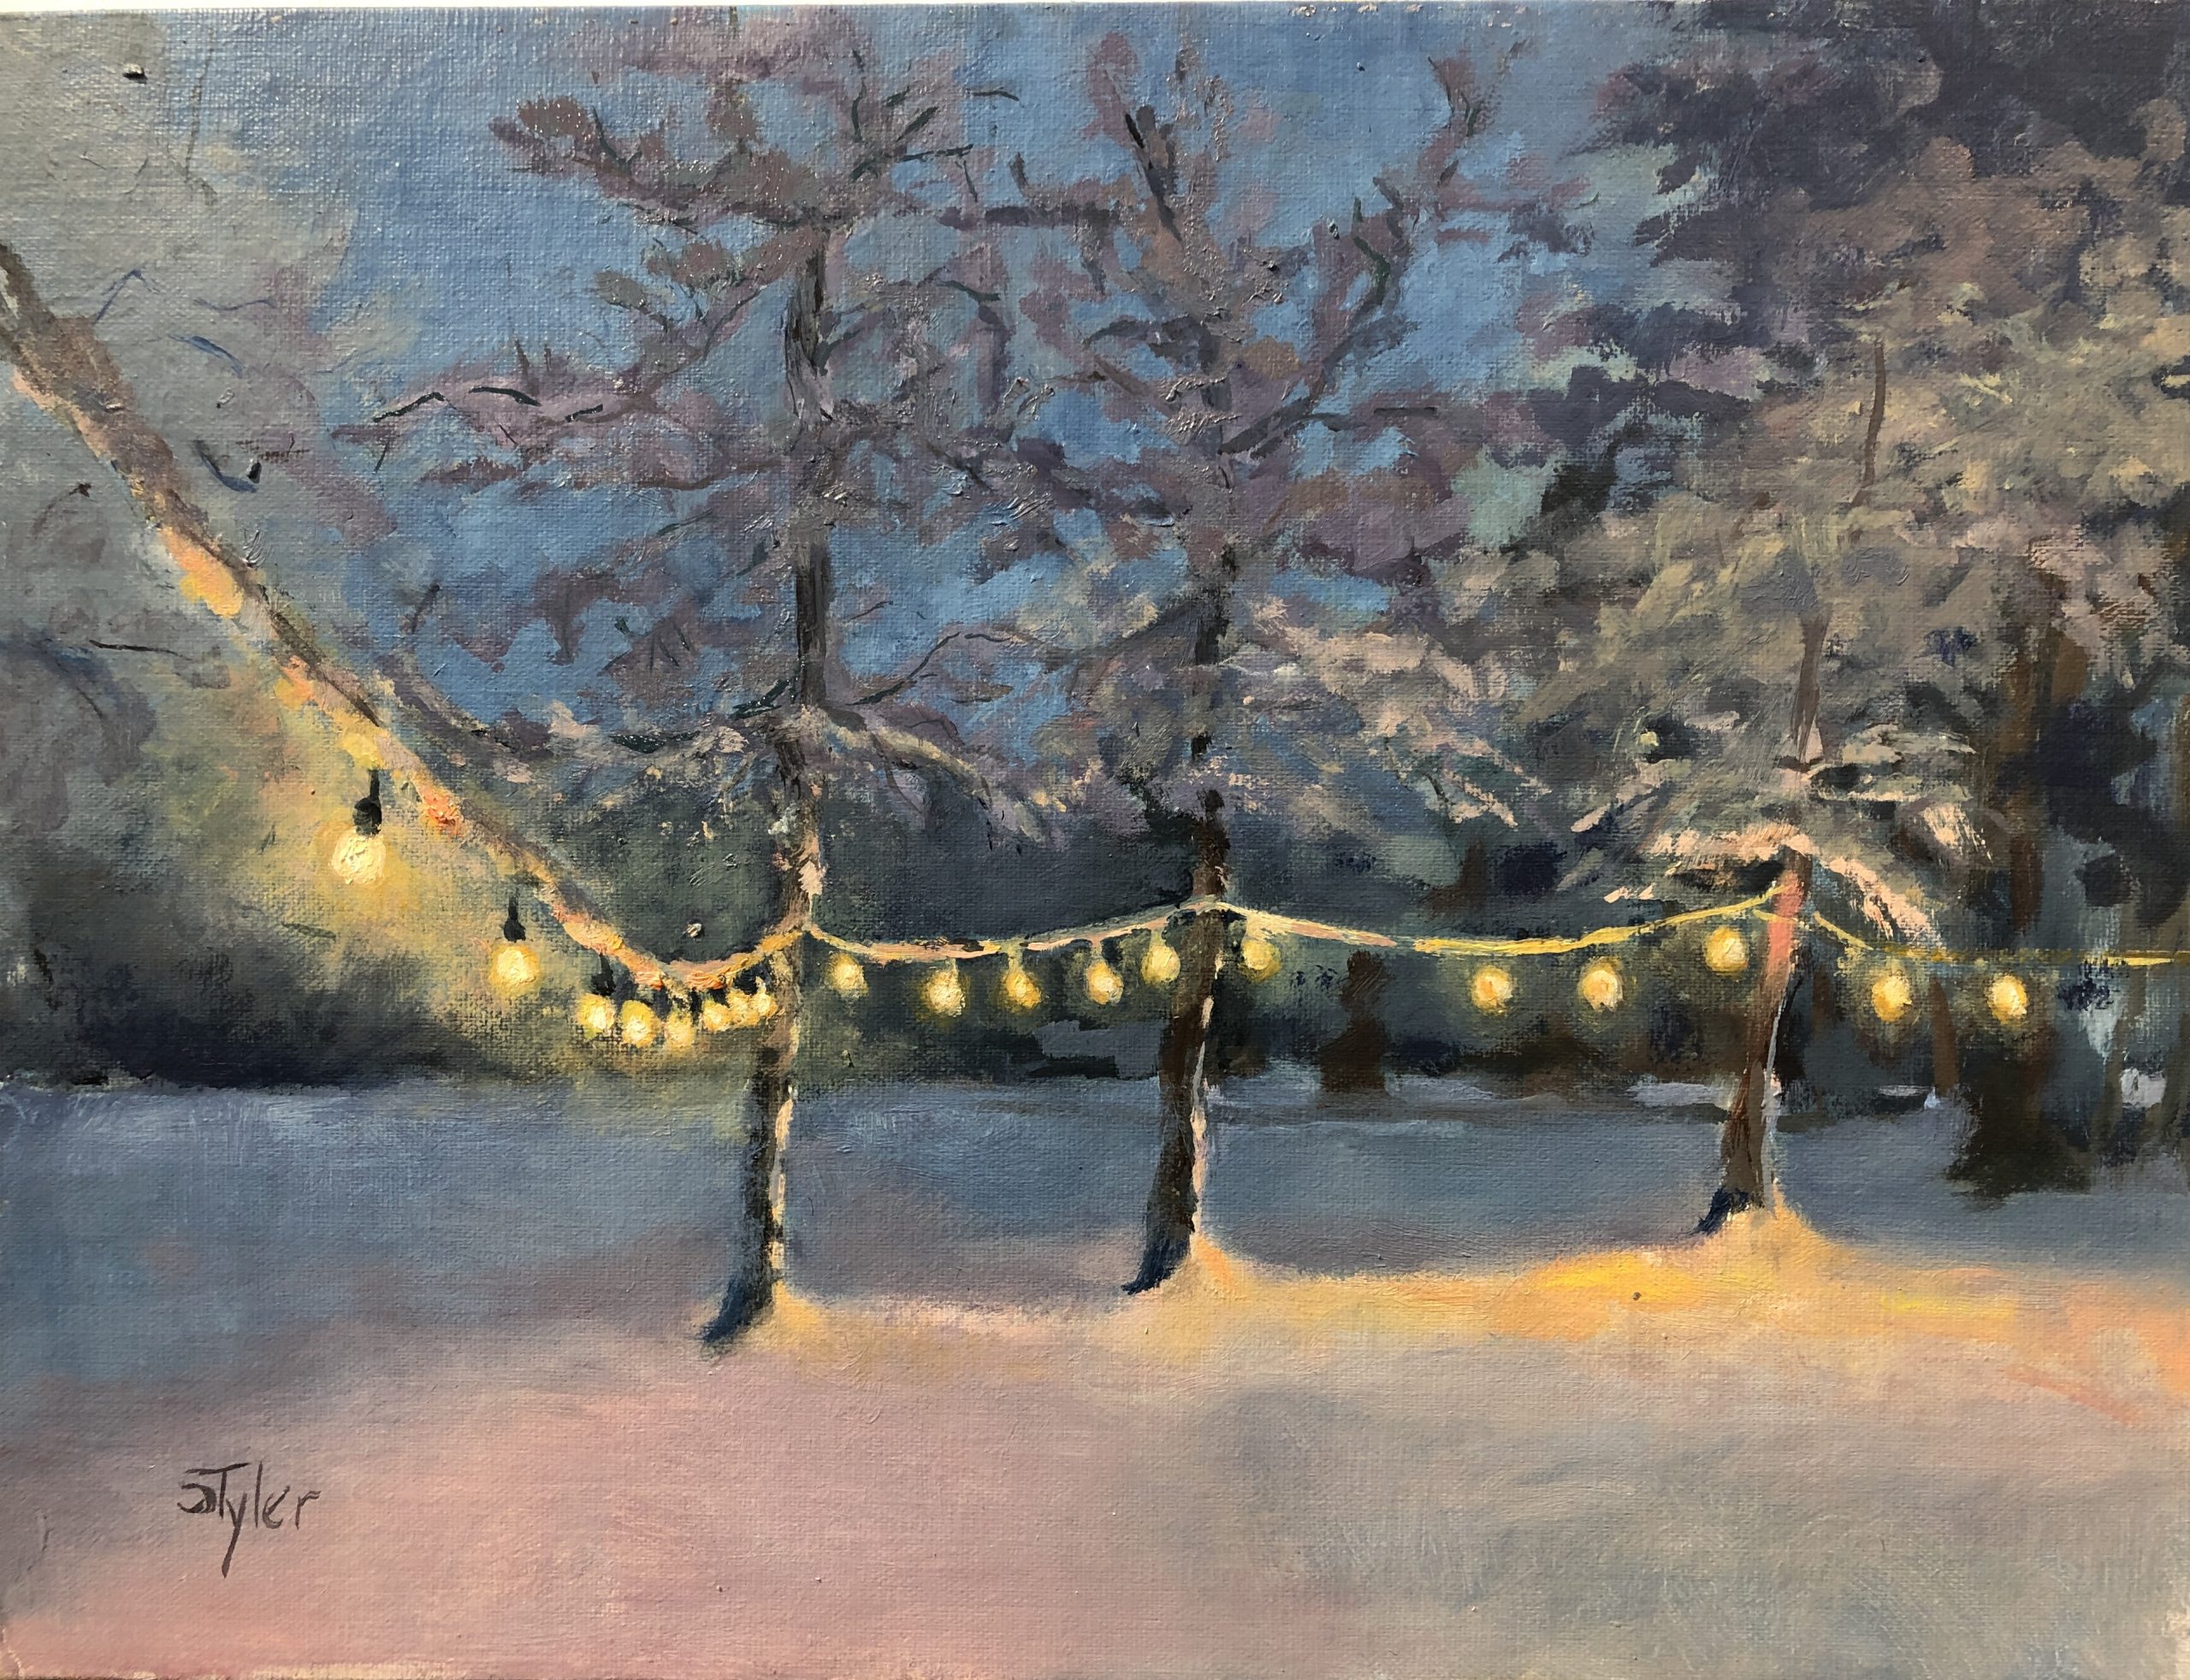 Original oil painting of a snowy evening at dusk. The fading light is overcome with the effect of a string of yard lights strung between the trees. The light effect makes the scene magical.